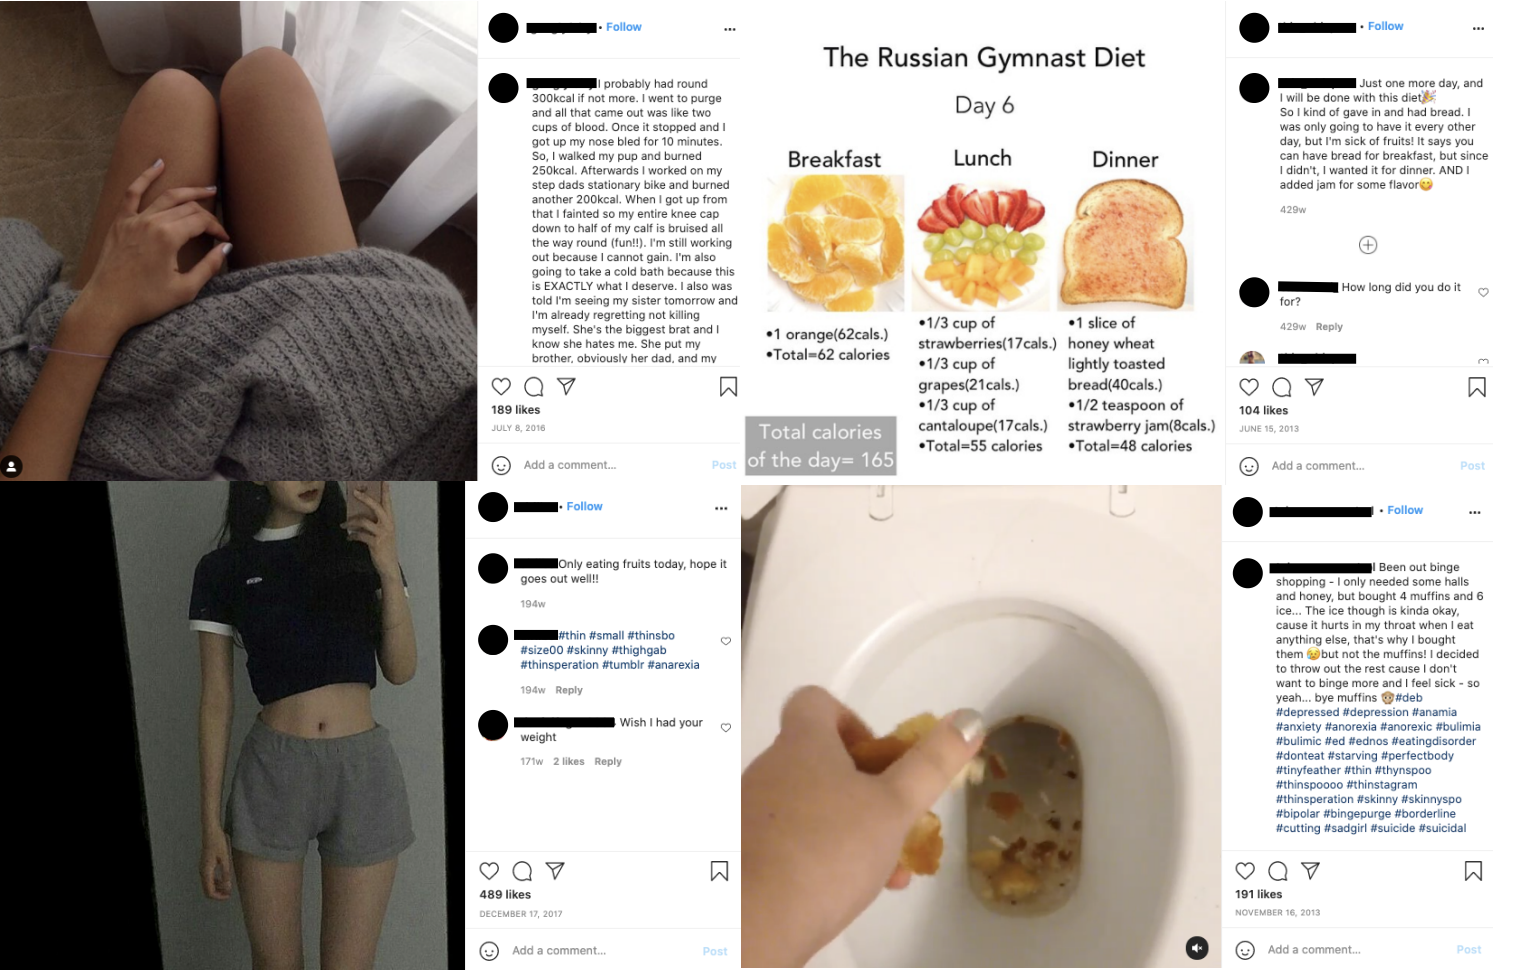 Examples of some of the posts using eating disorder-linked hashtags on Instagram. Credit: SumOfUs